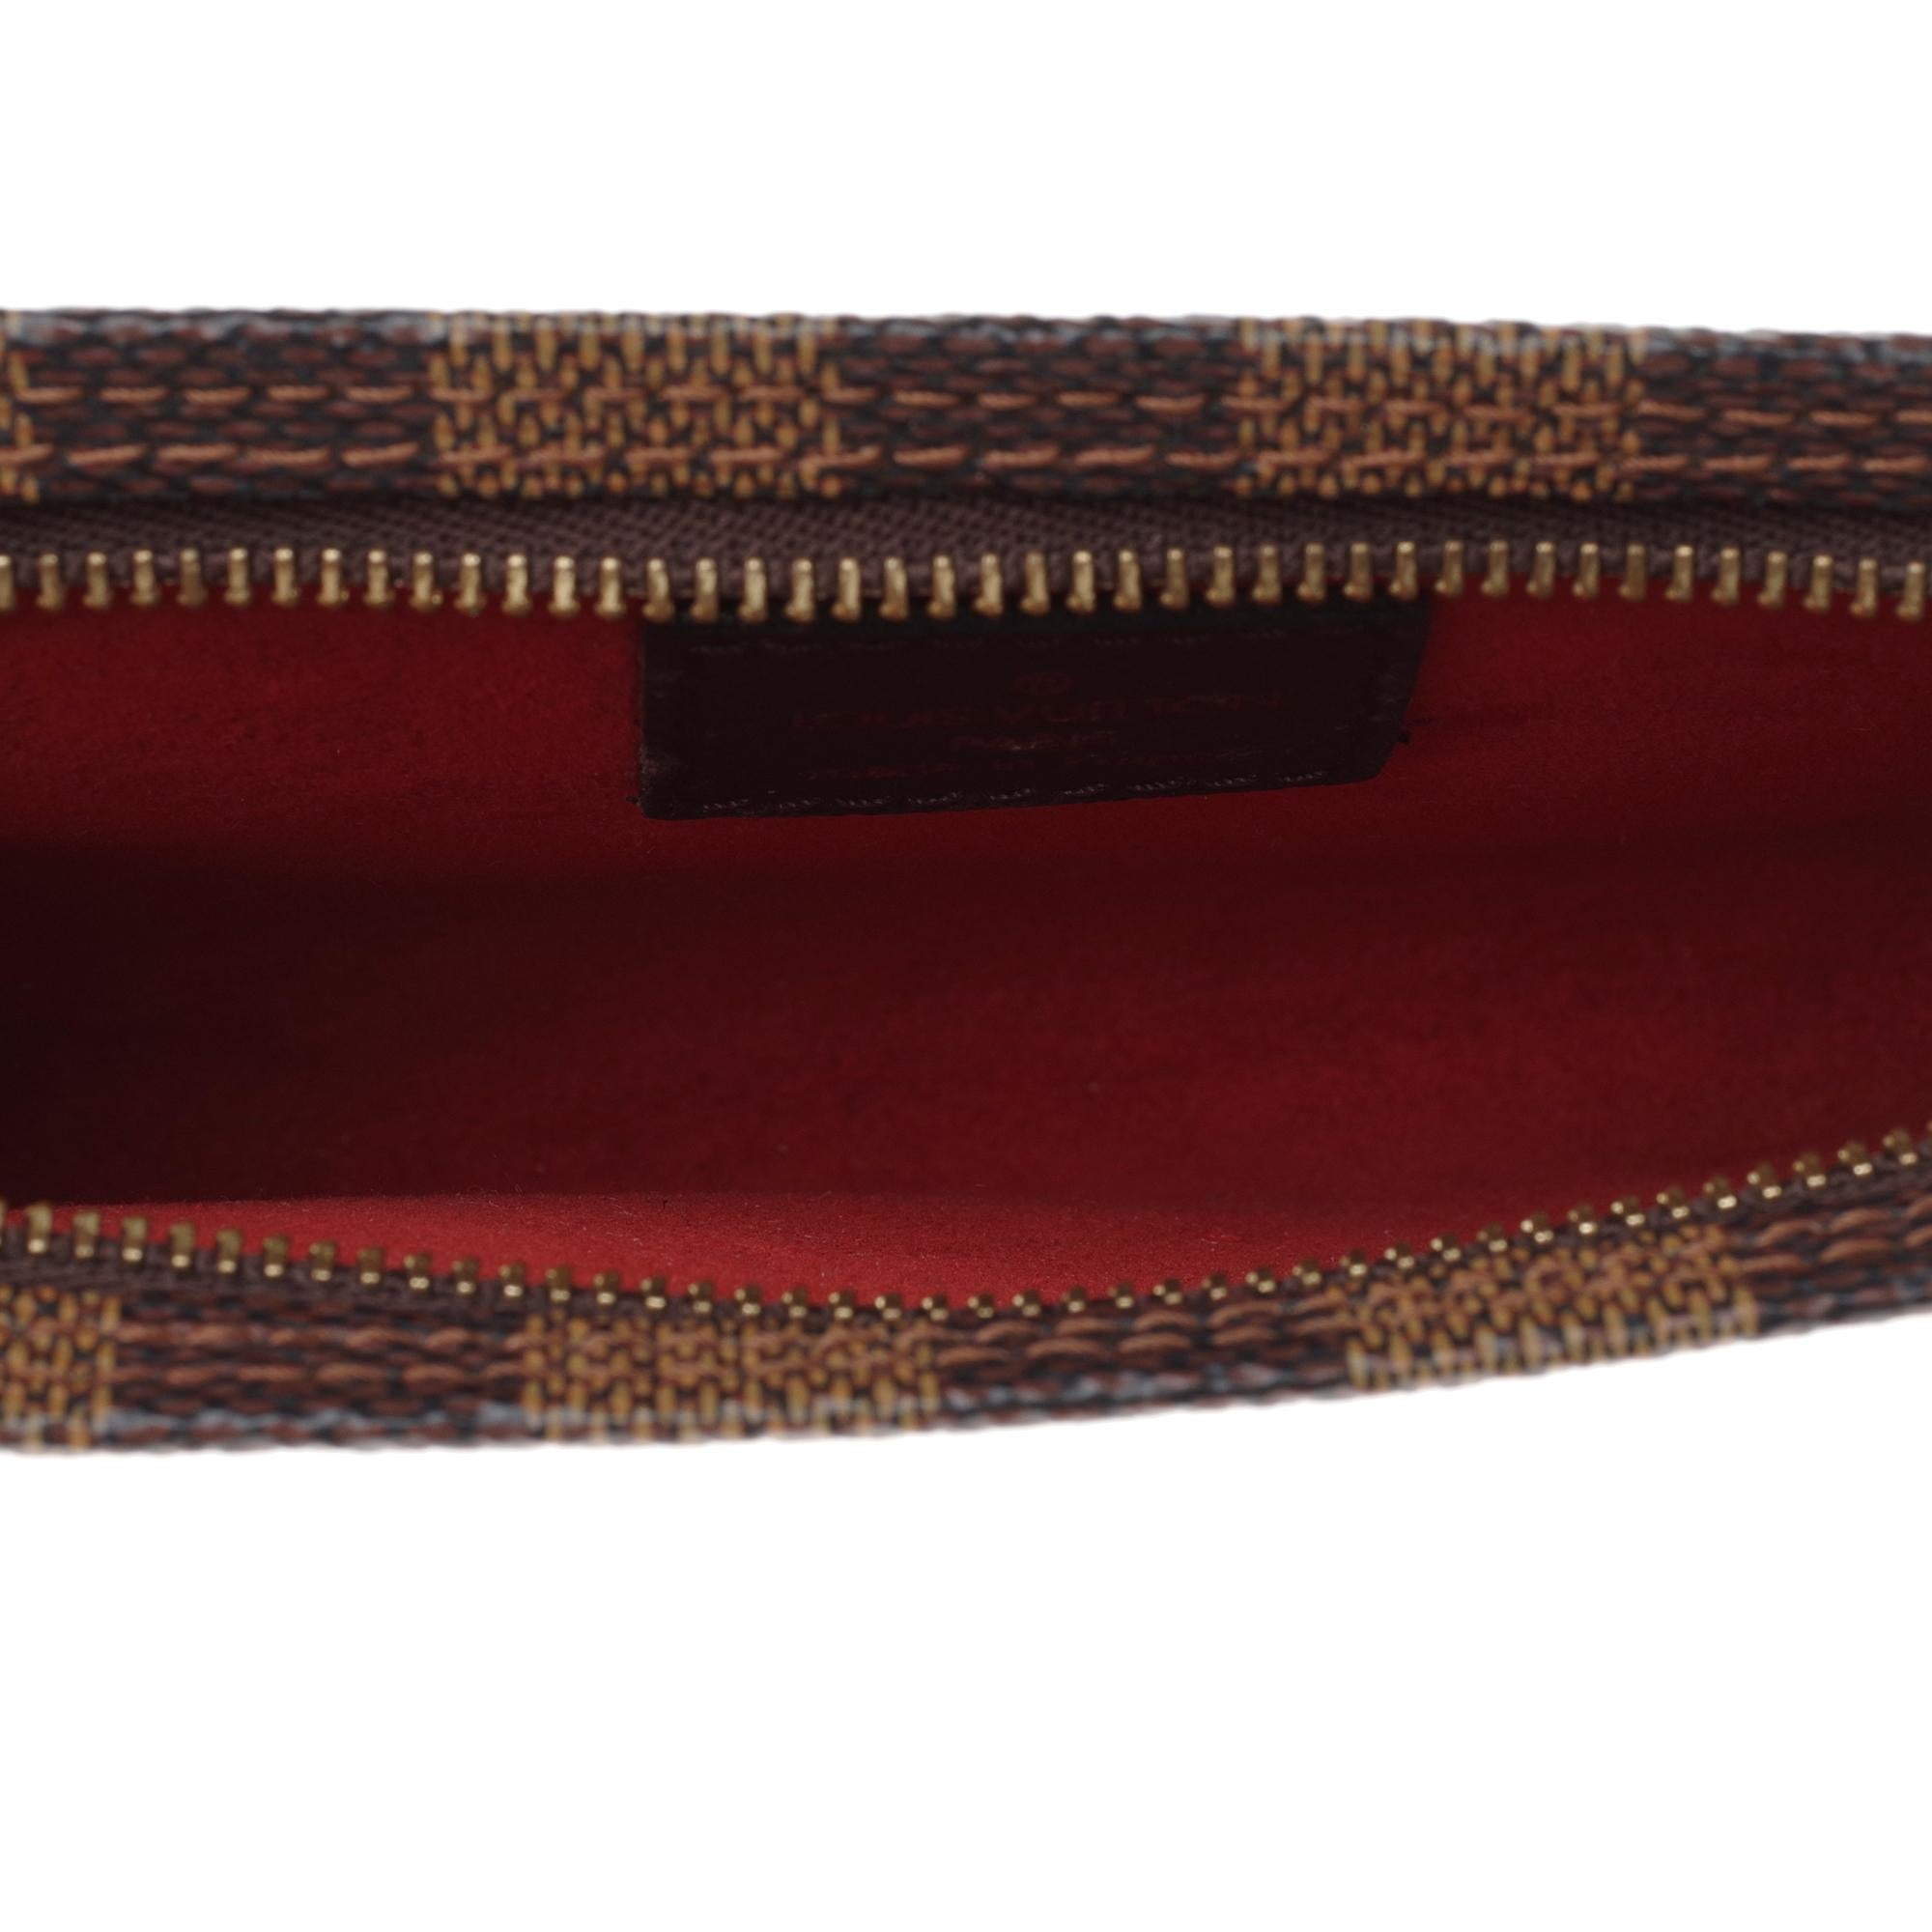 Charming Louis Vuitton Make-Up bag in brown coated canvas 2